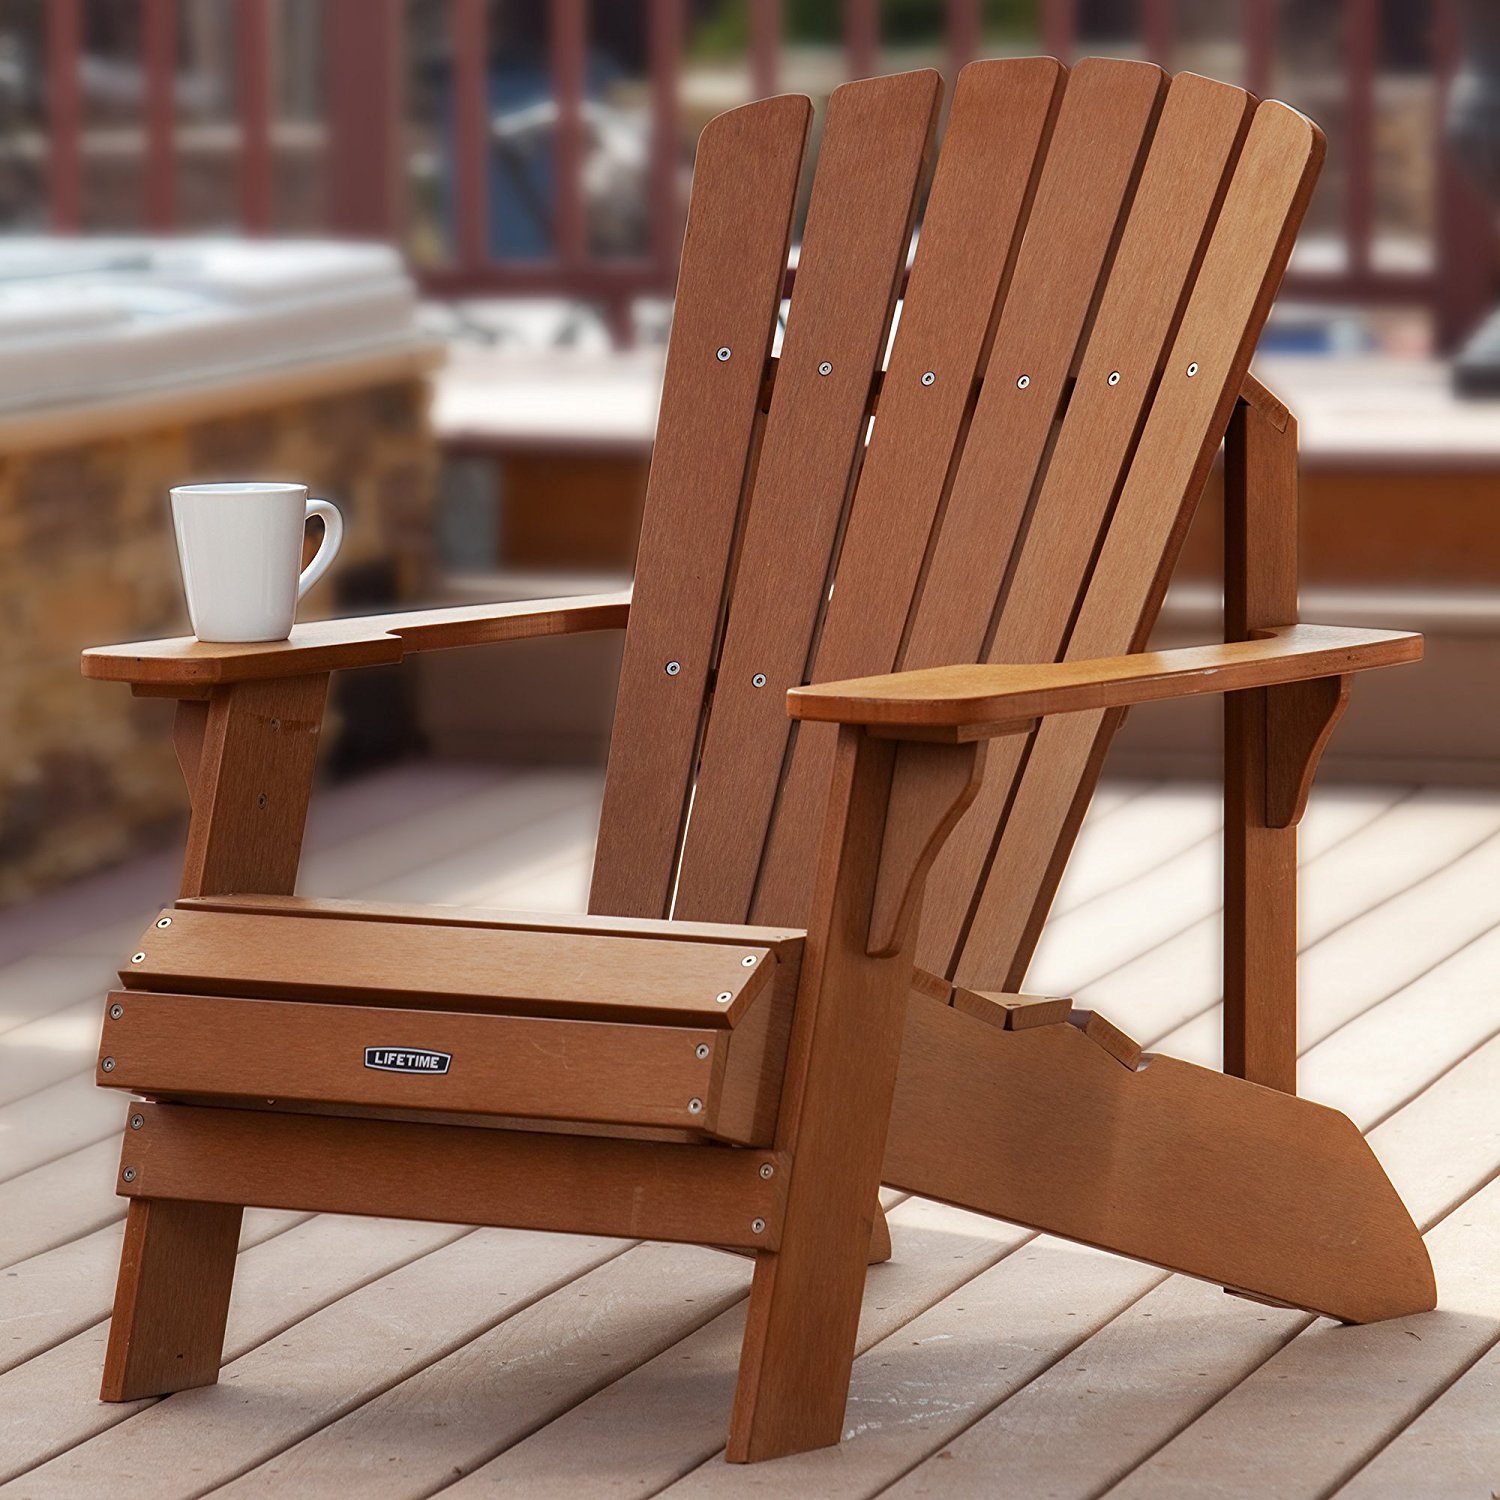 Poly Resin Adirondack Chairs. Reviews and Buyer's Guide